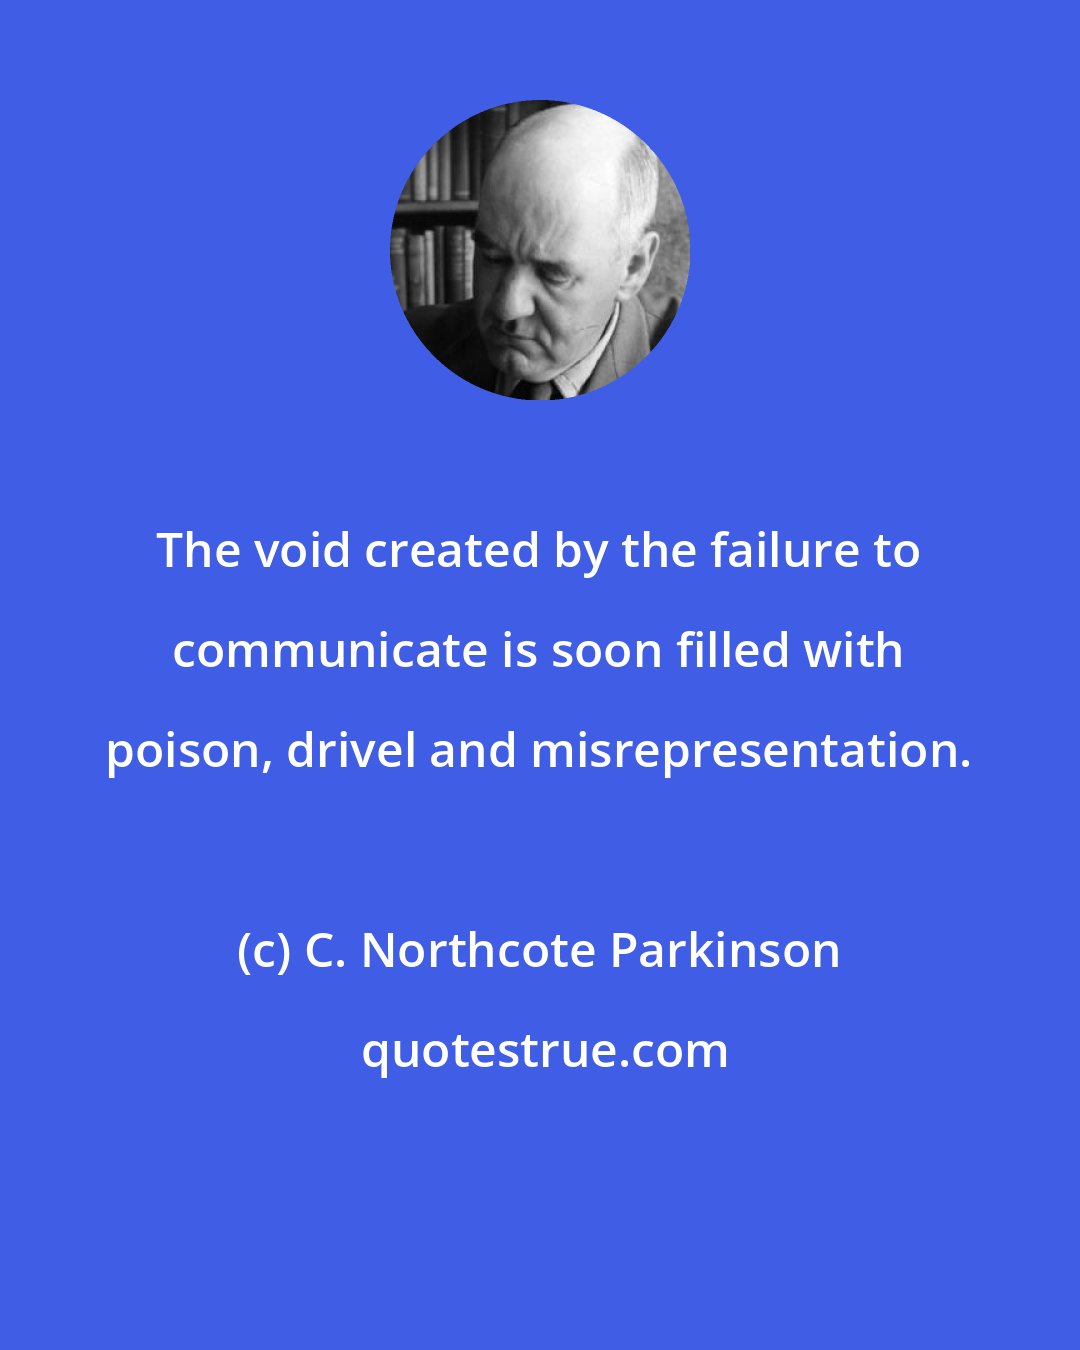 C. Northcote Parkinson: The void created by the failure to communicate is soon filled with poison, drivel and misrepresentation.